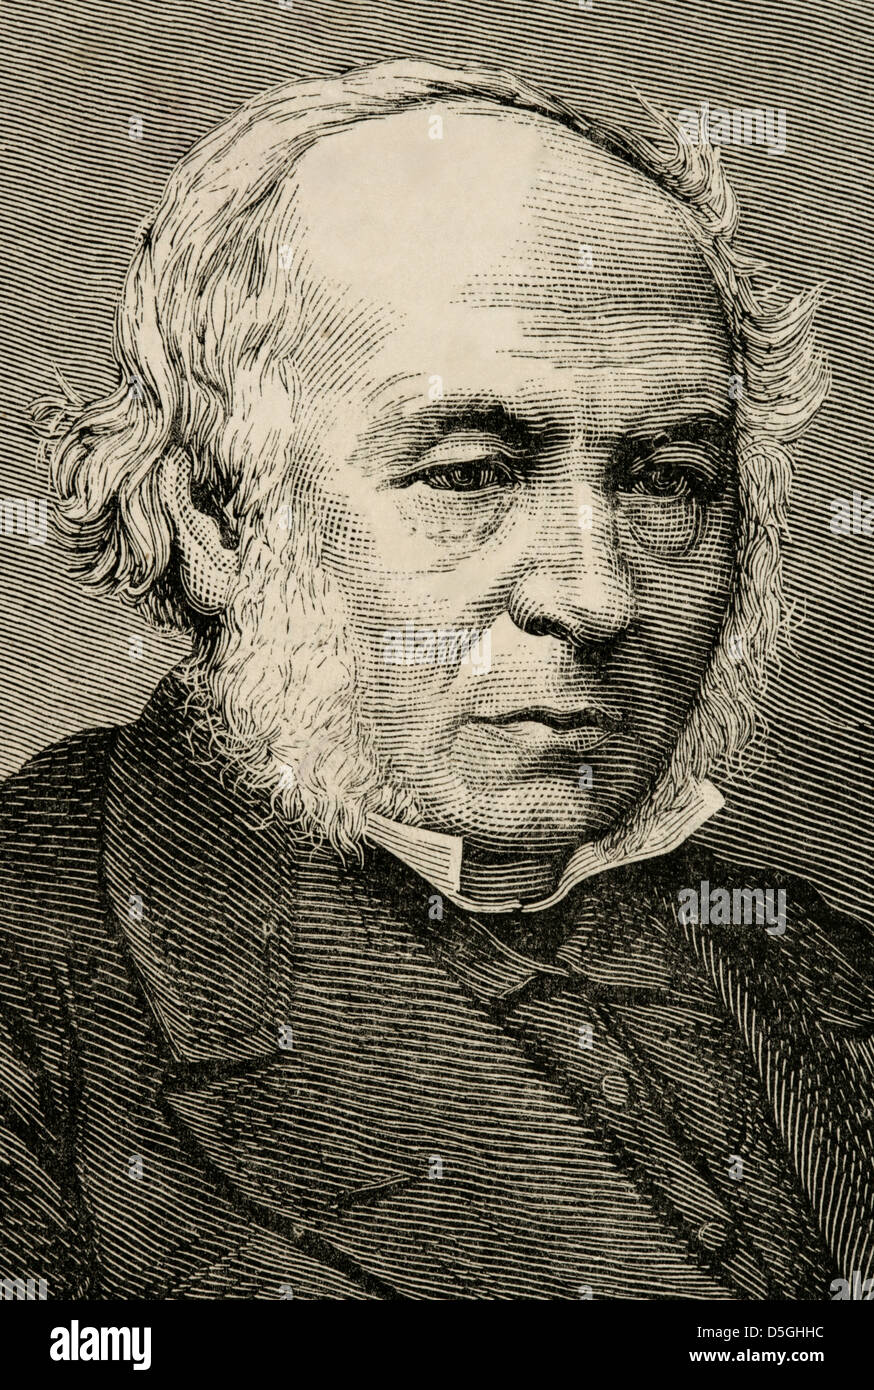 Rowland Hill (1795-1879). British teacher and creator of the first postage stamp, the Penny Black. Engraving. Stock Photo